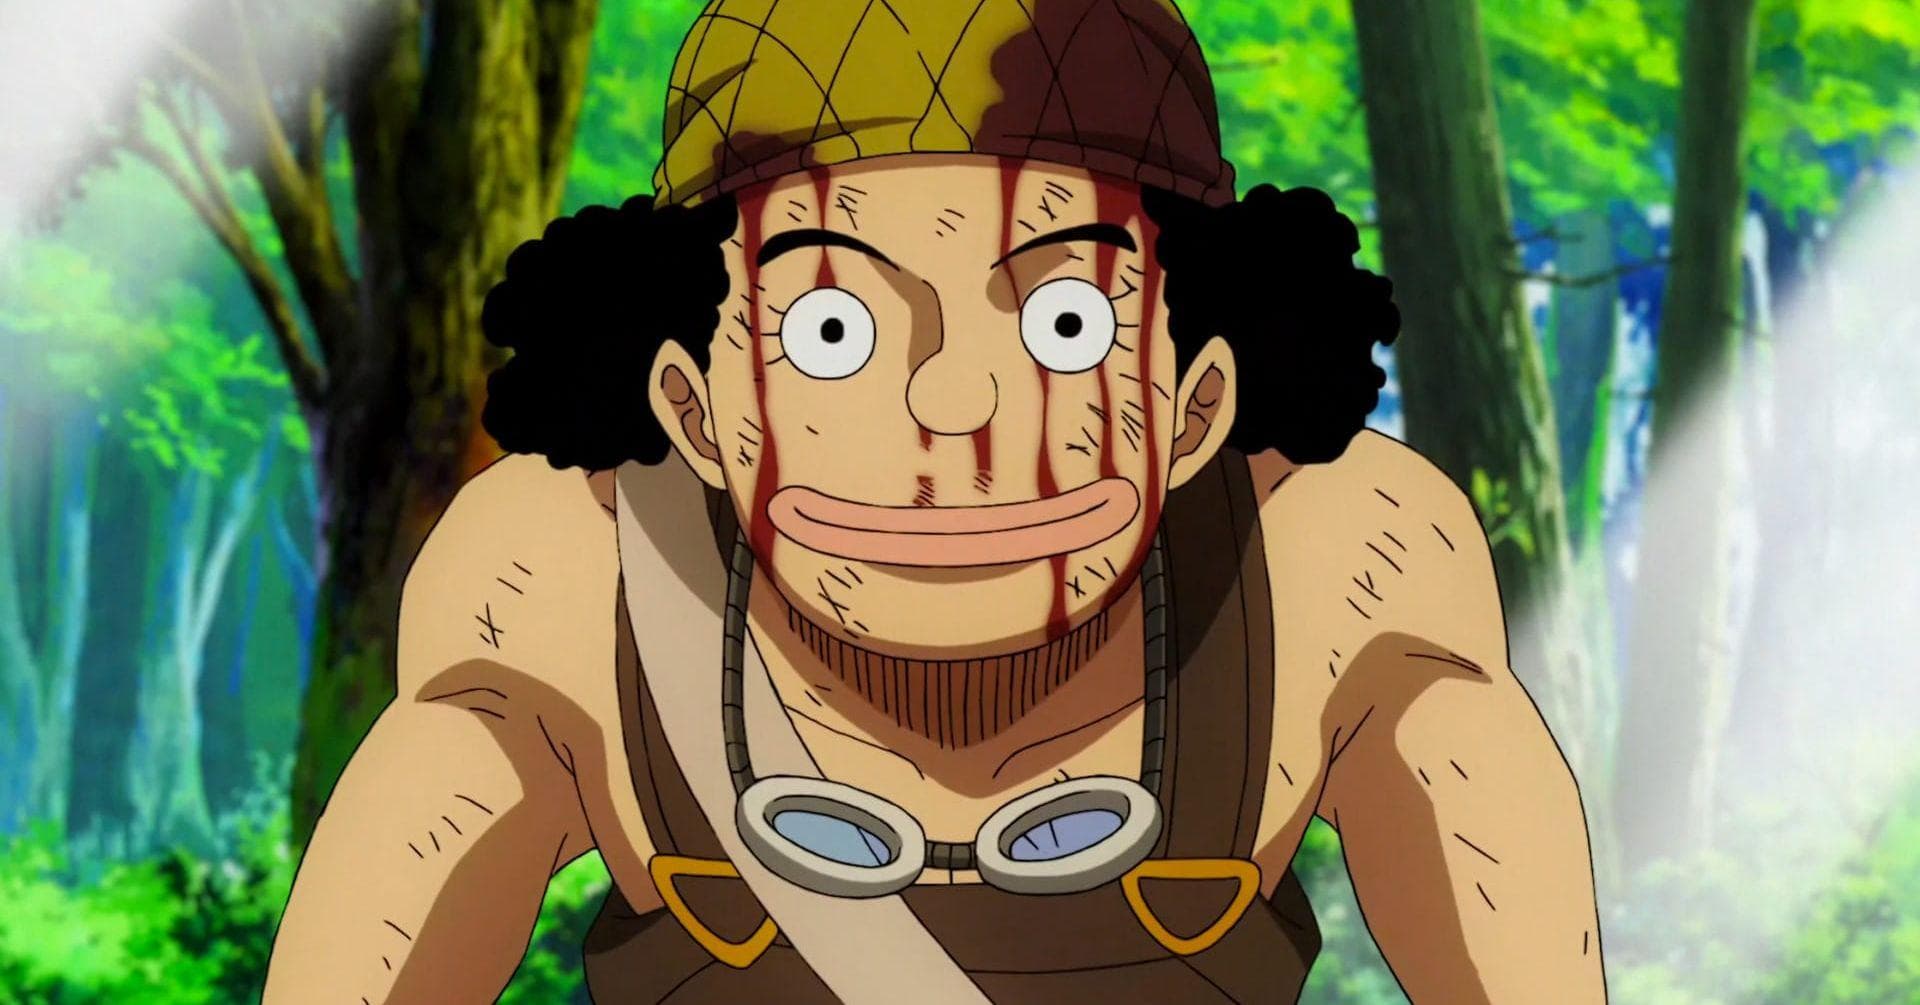 One Piece Episode 1055 Release Date, Where to Watch Online, Preview, and More - Usopp from One Piece